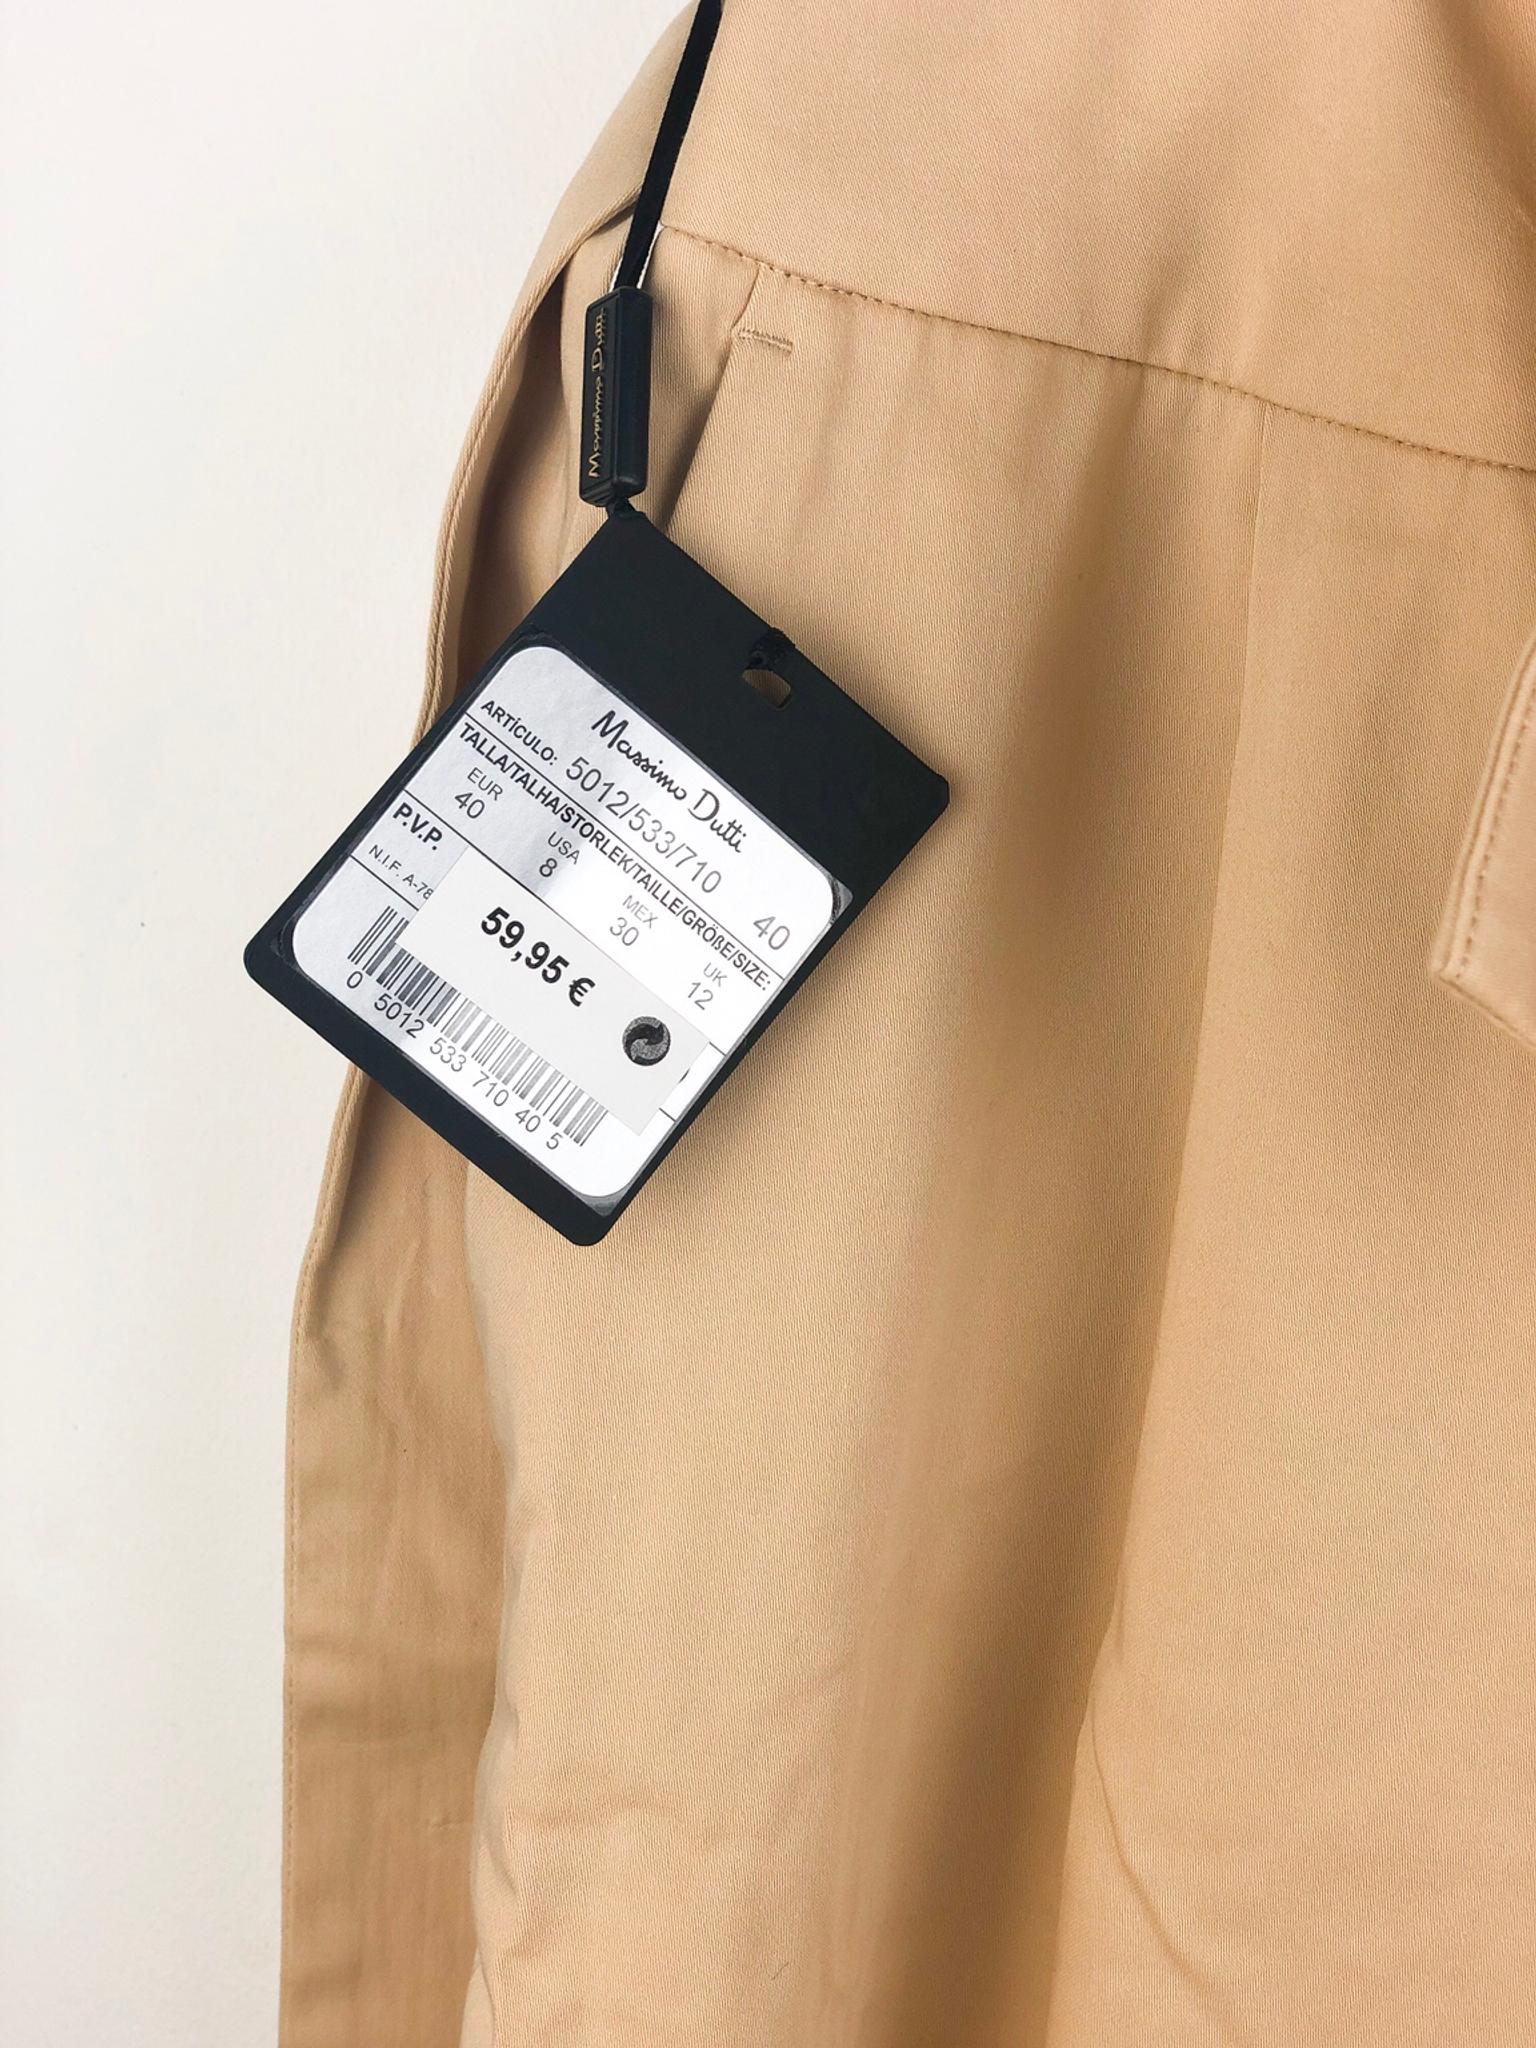 Salvación Constituir lineal Massimo Dutti trousers, size 12 in TW10 Thames for £15.00 for sale | Shpock